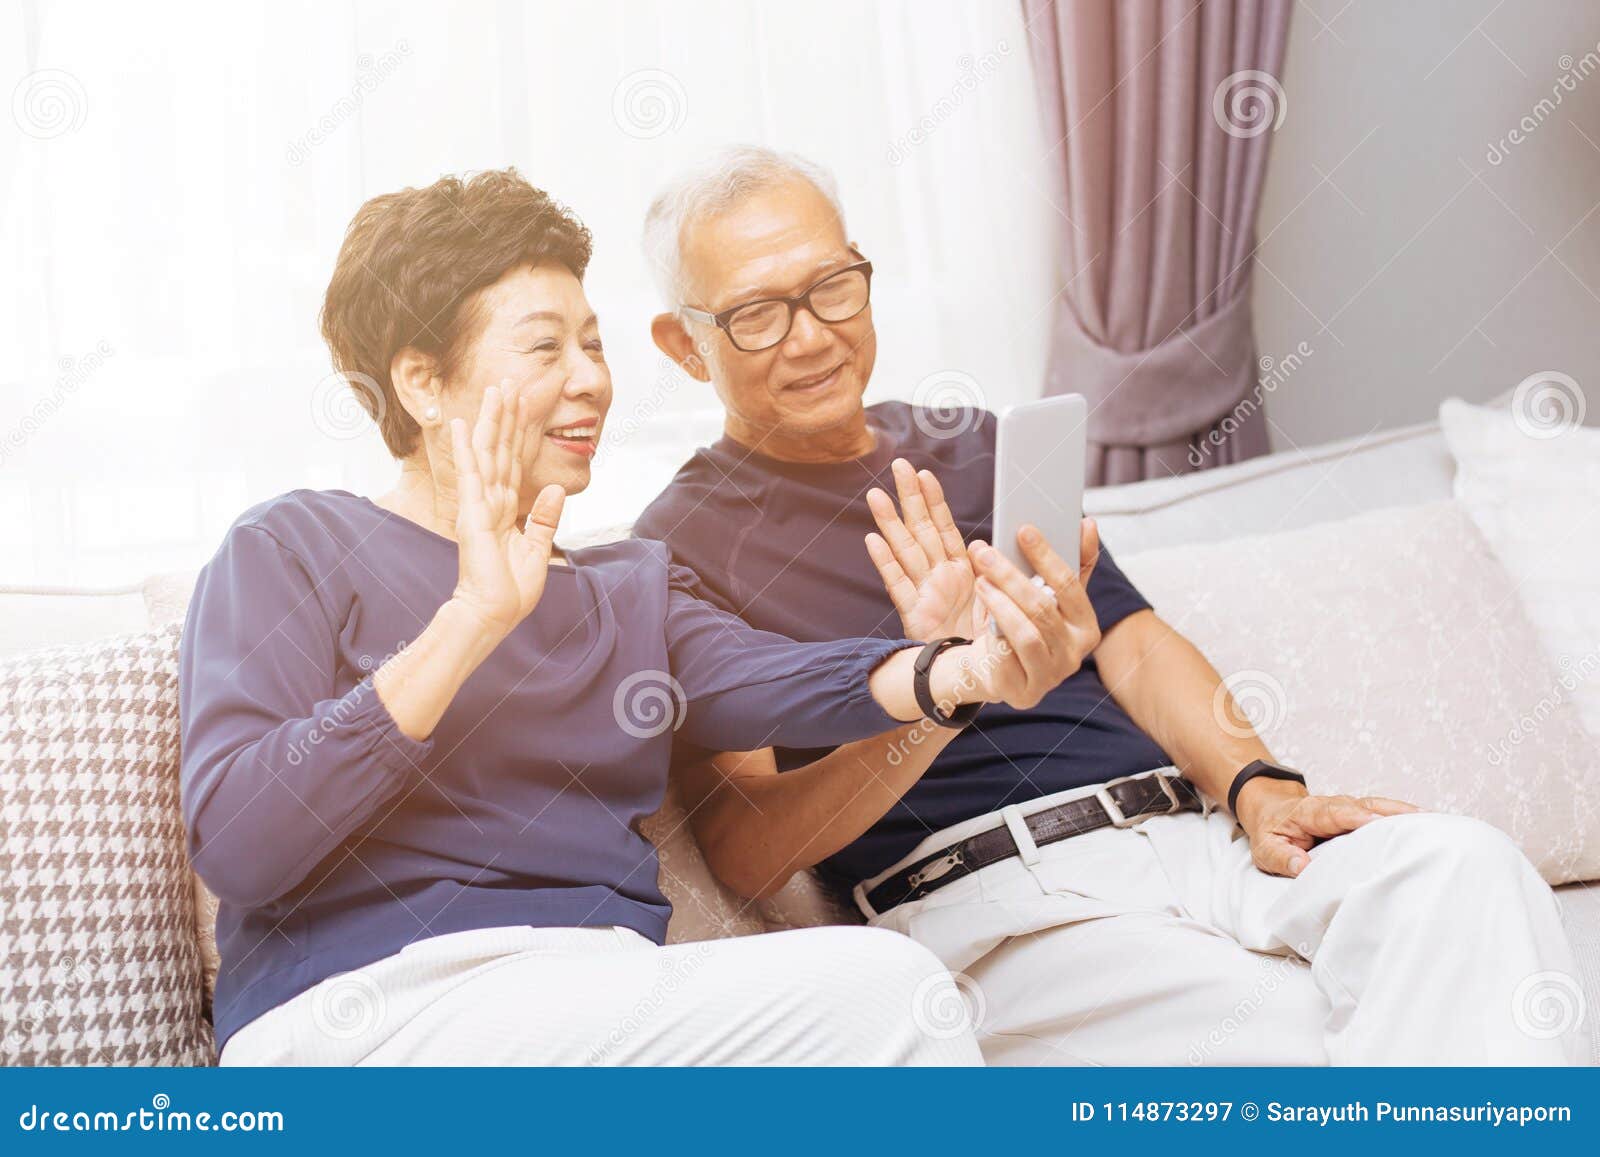 senior asian couple grand parents making a video call and waving at the caller.